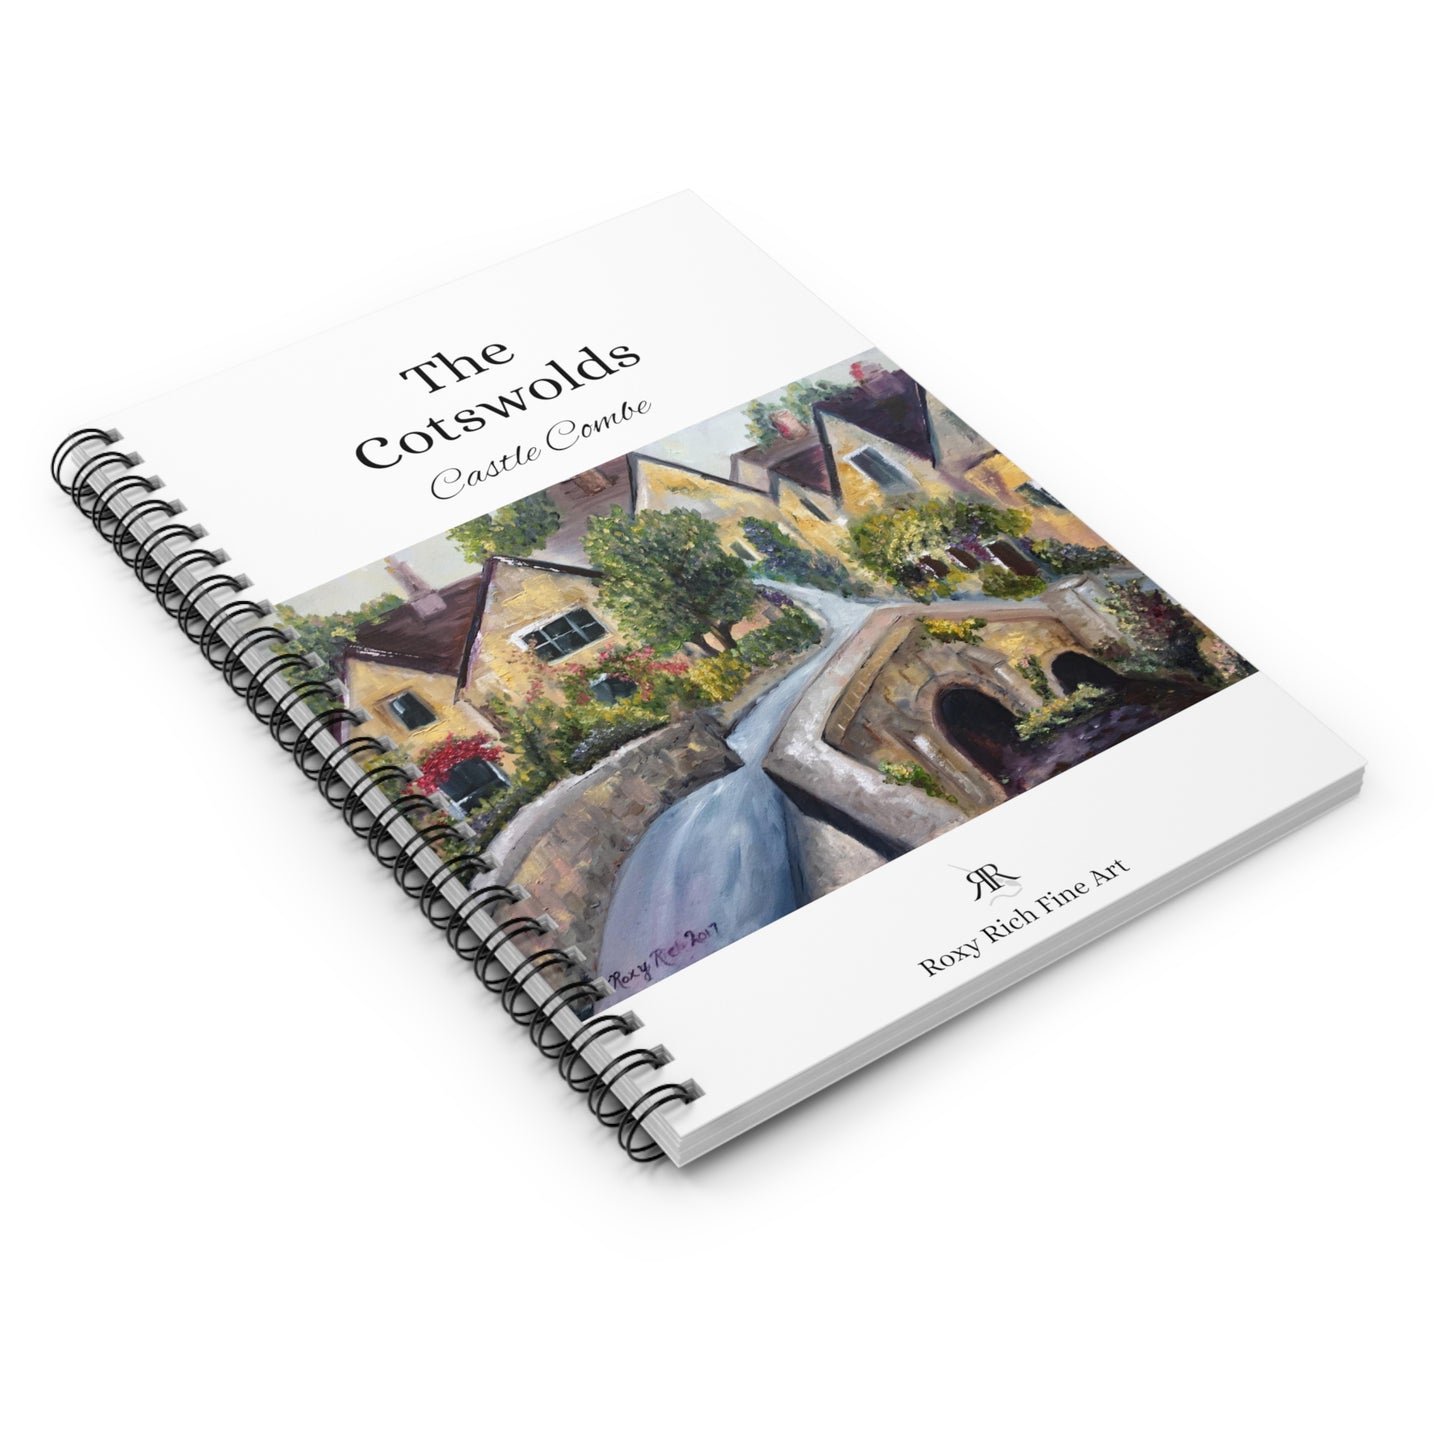 Castle Combe "The Cotswolds" Spiral Notebook